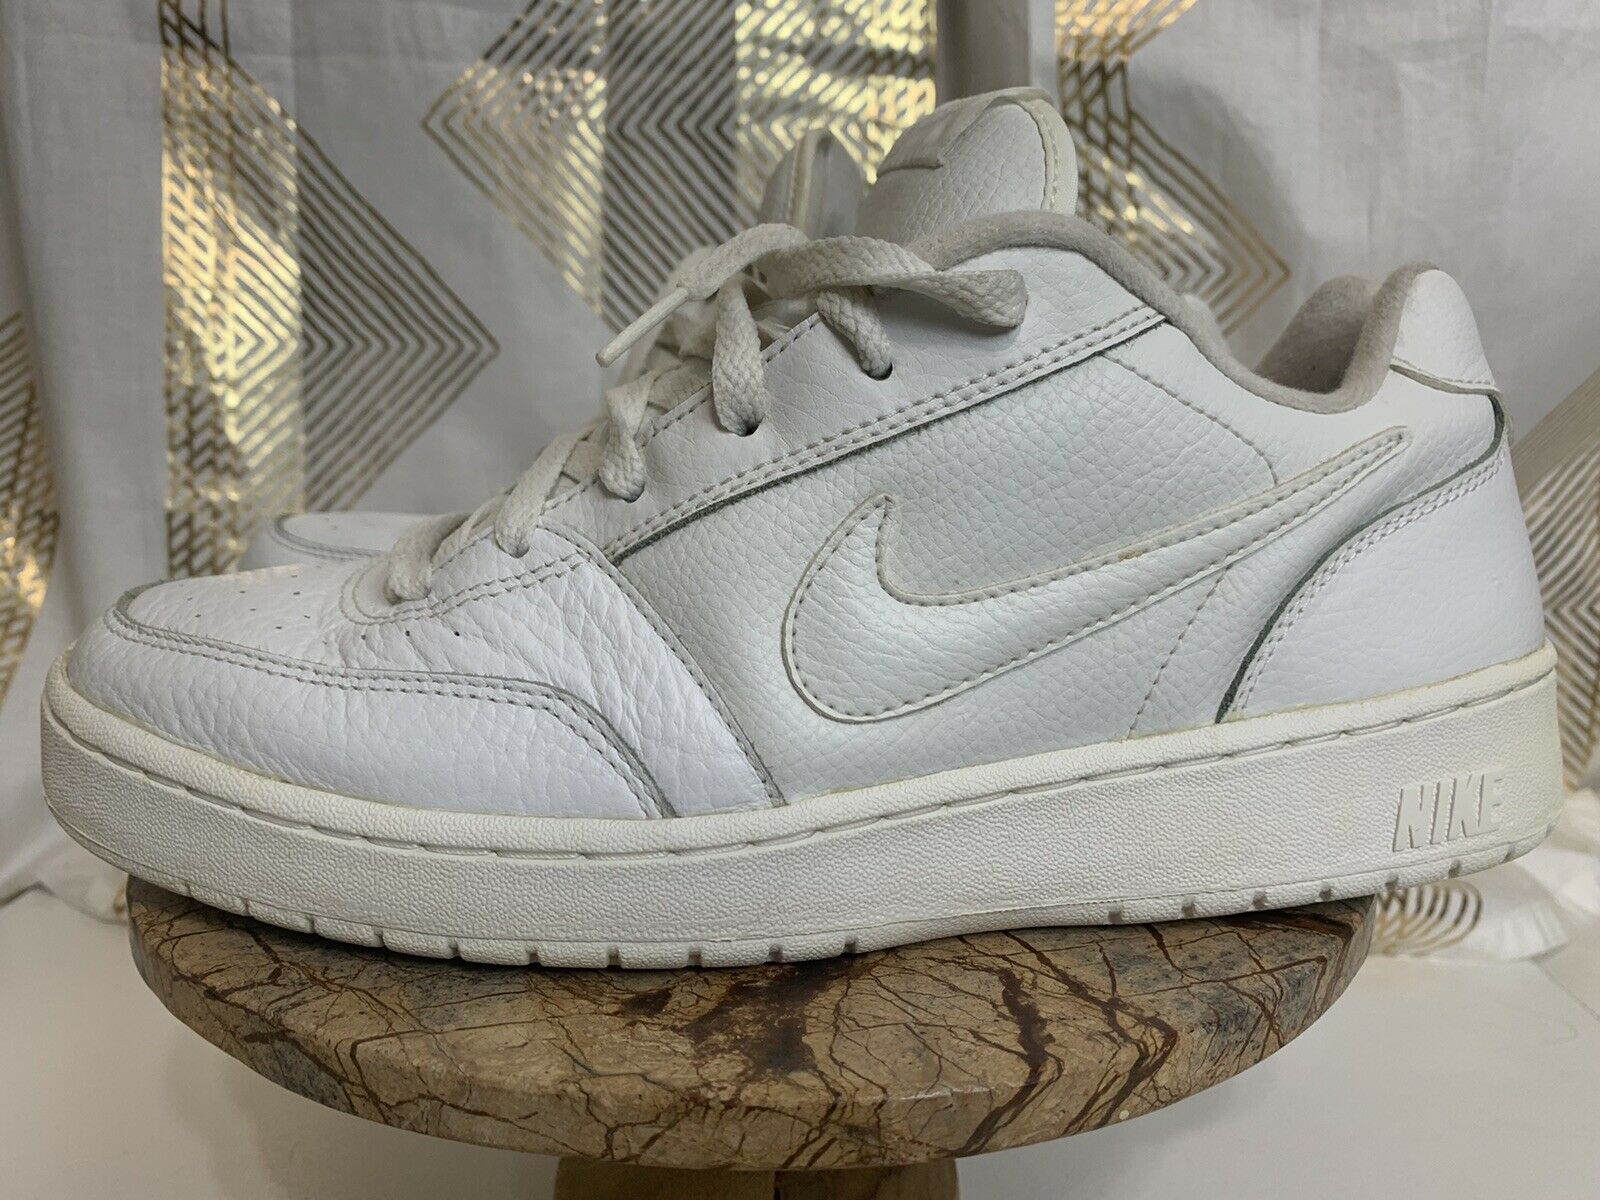 Nike 2002 White Low Top Shoes 302595-111 00 Size 9.5 Old School 20